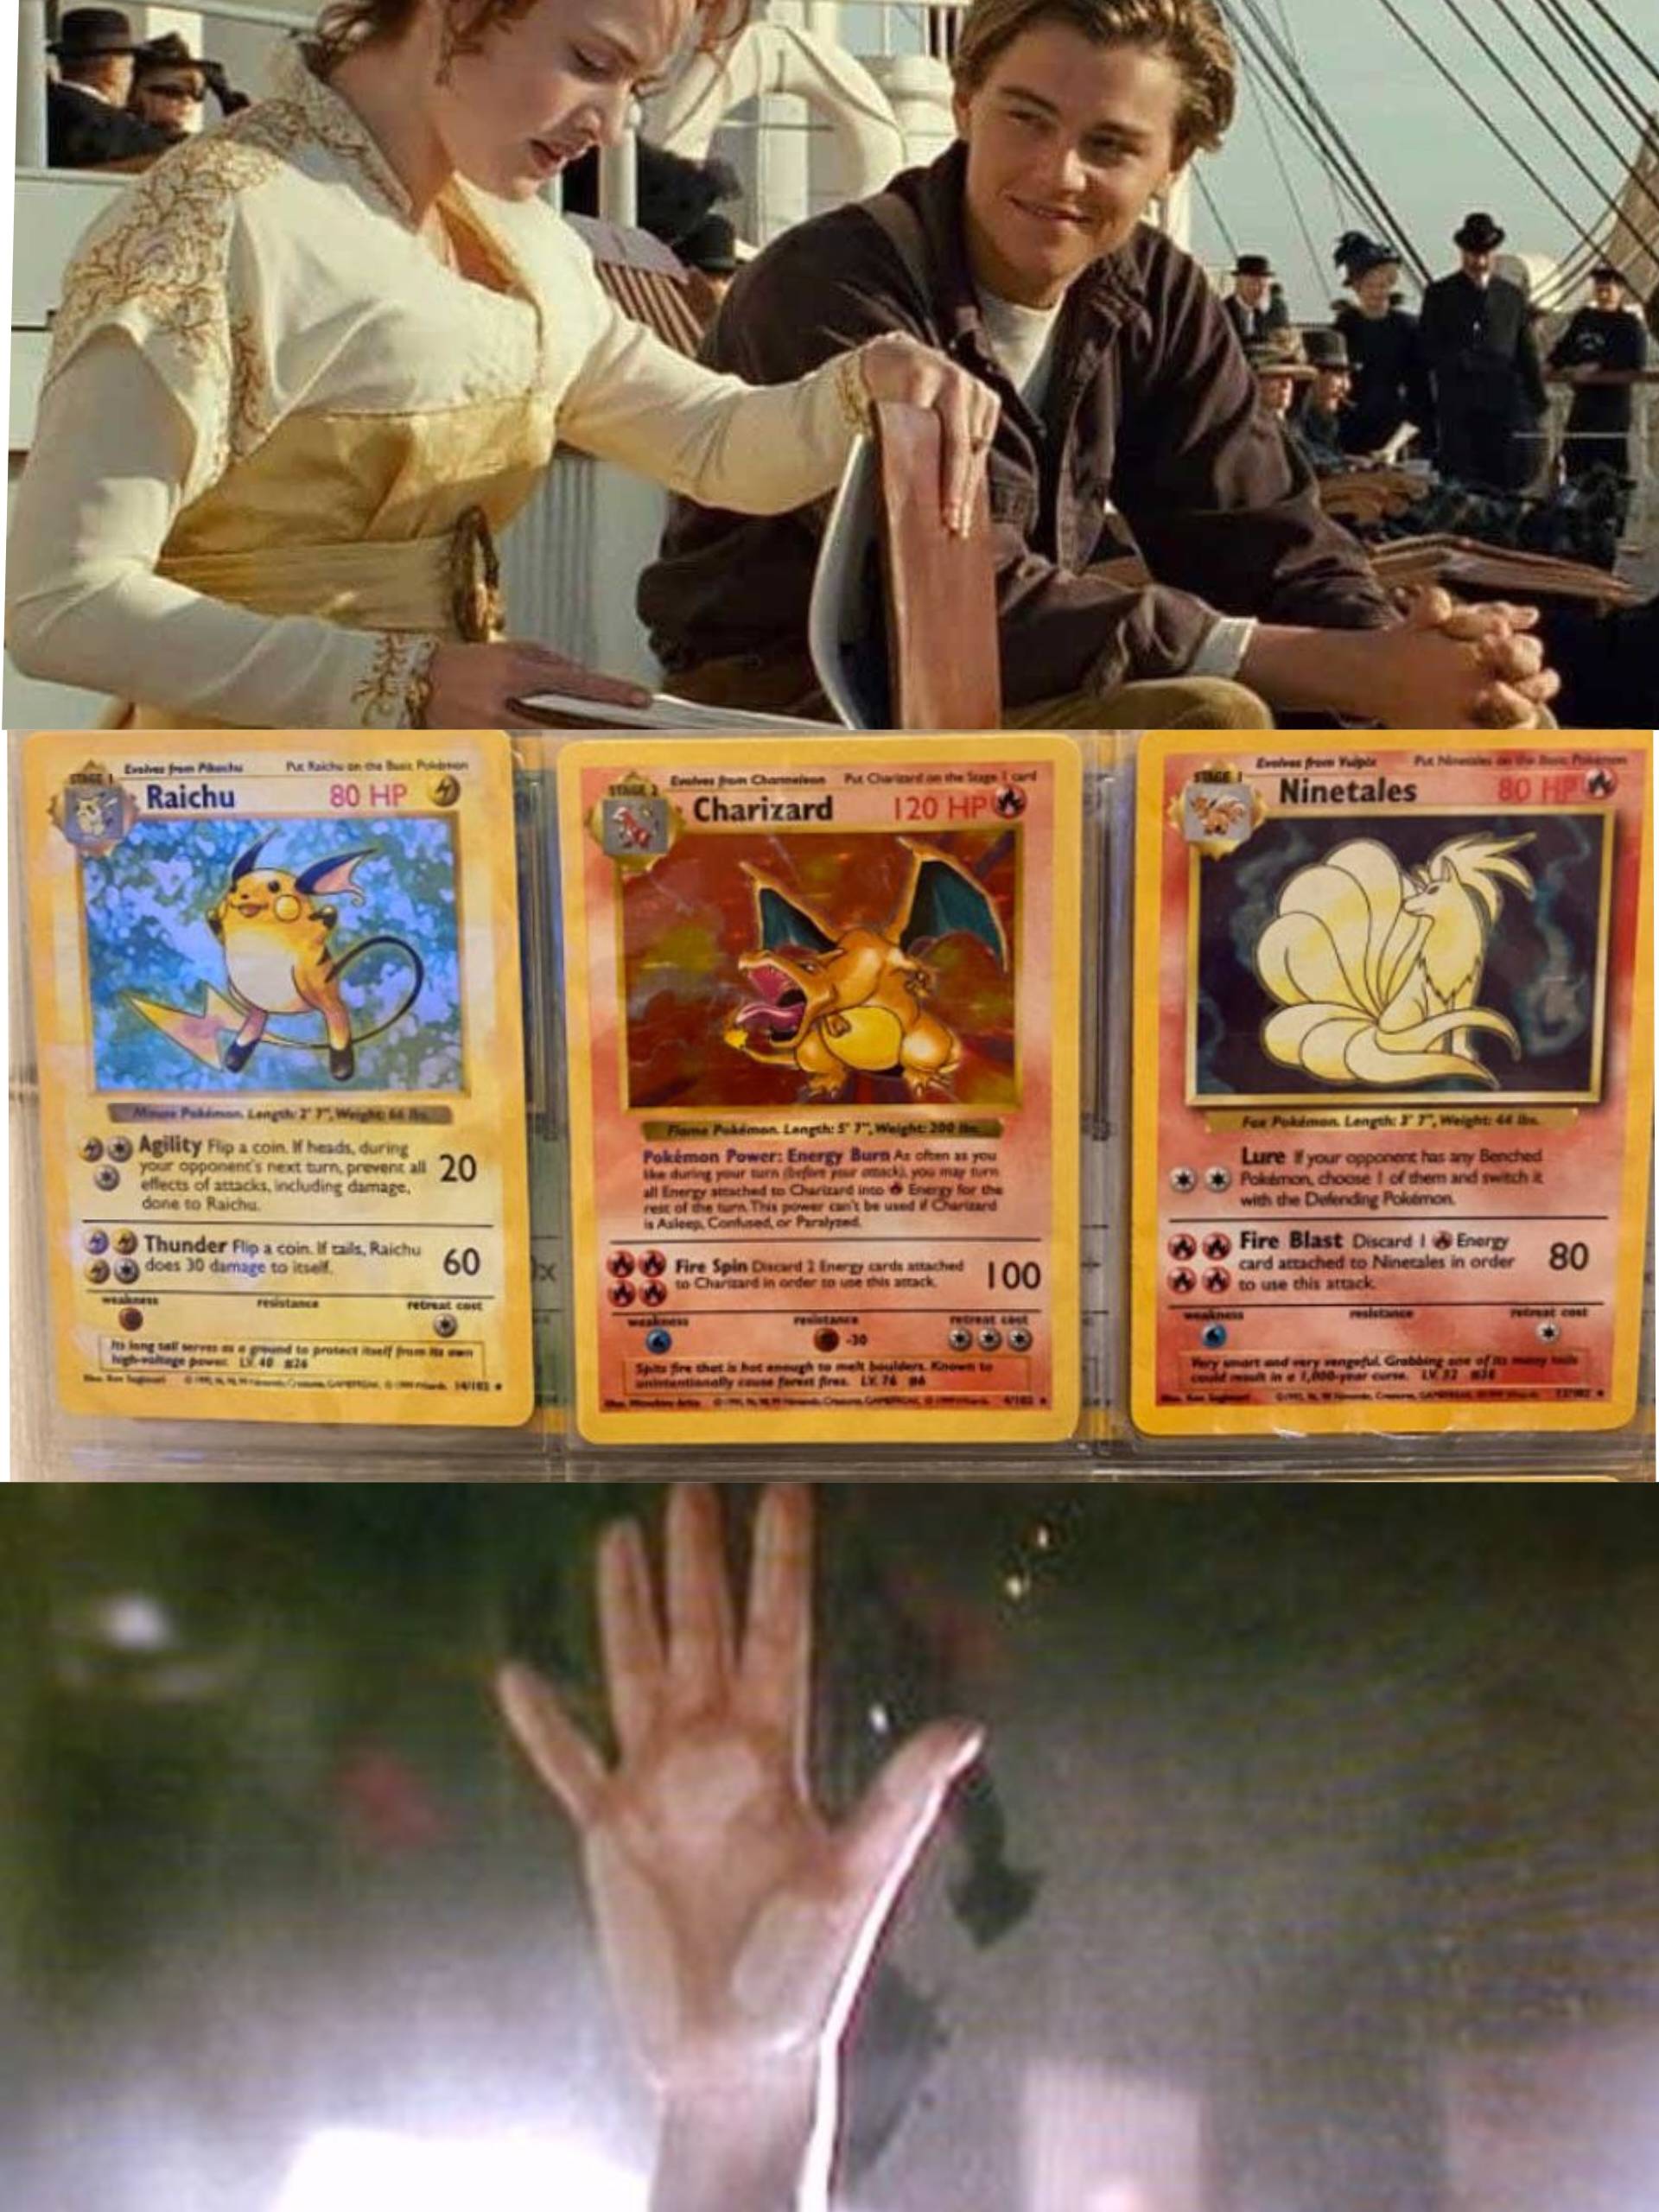 Gaming memes - pokemon card - Evalves from Phuchu Raichu P Raichu on the Bus Pon 80 Hp Agility Flip a coin. If heads, during your opponent's next turn, prevent all 20 effects of attacks, including damage. done to Raichu Thunder Flip a coin. If tails, Raic